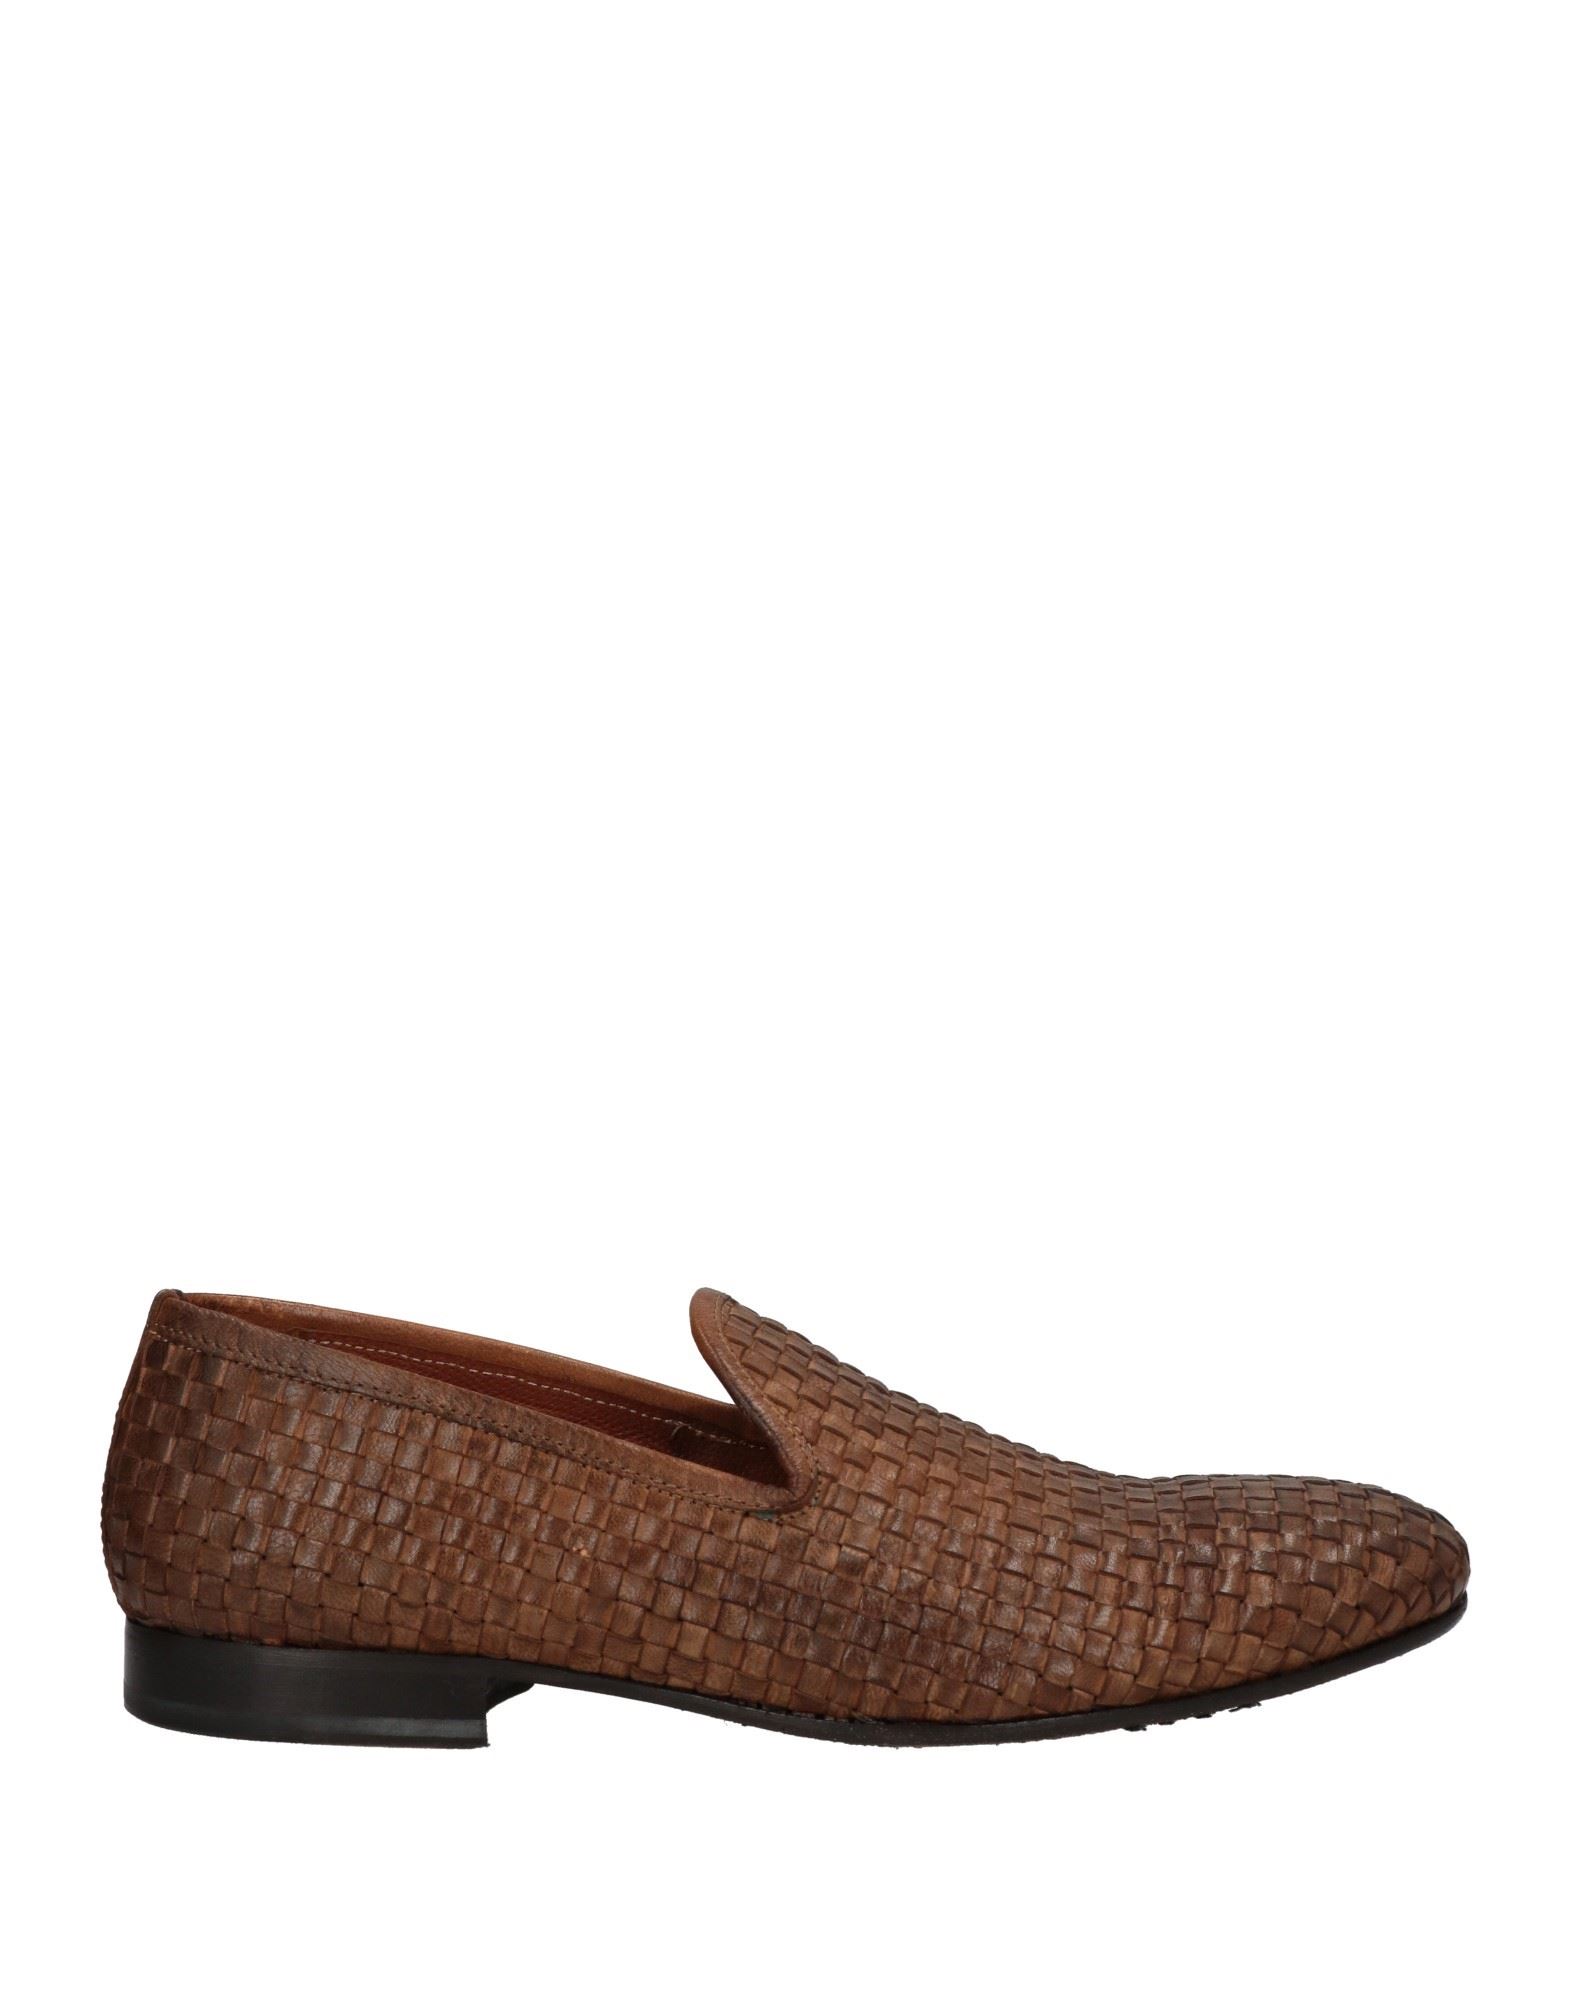 Pawelk's Loafers In Brown